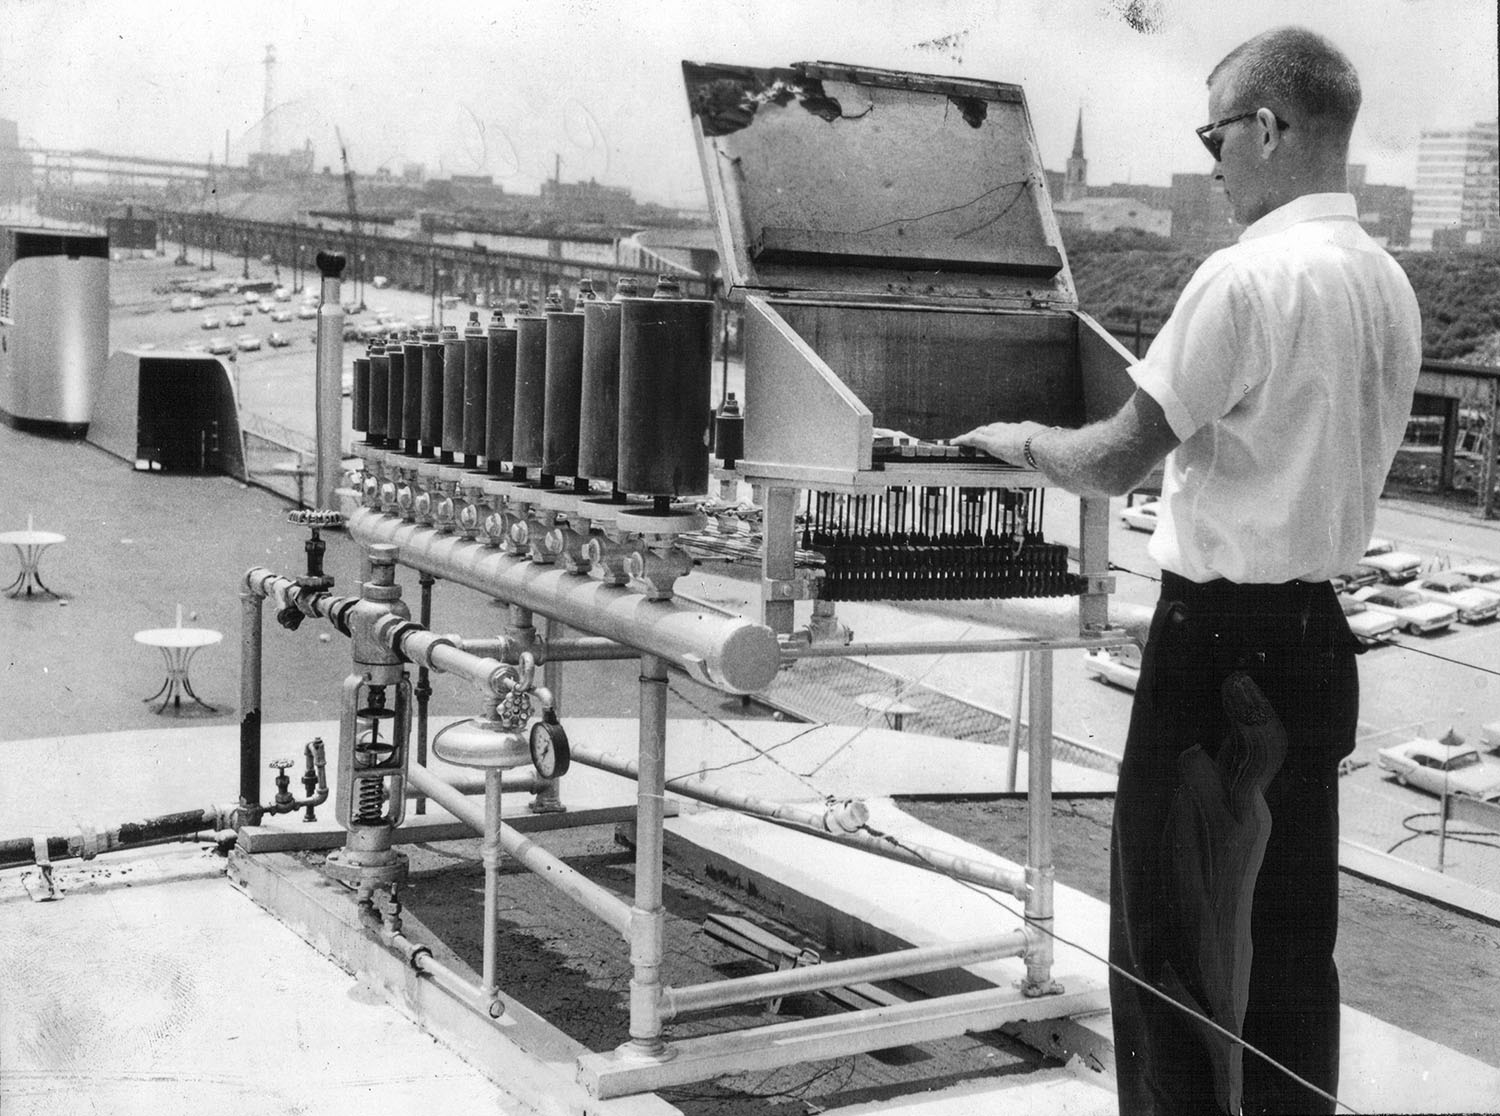 The steam calliope from the Capitol atop the S.S. Admiral in 1962. (Keith Norrington collection)